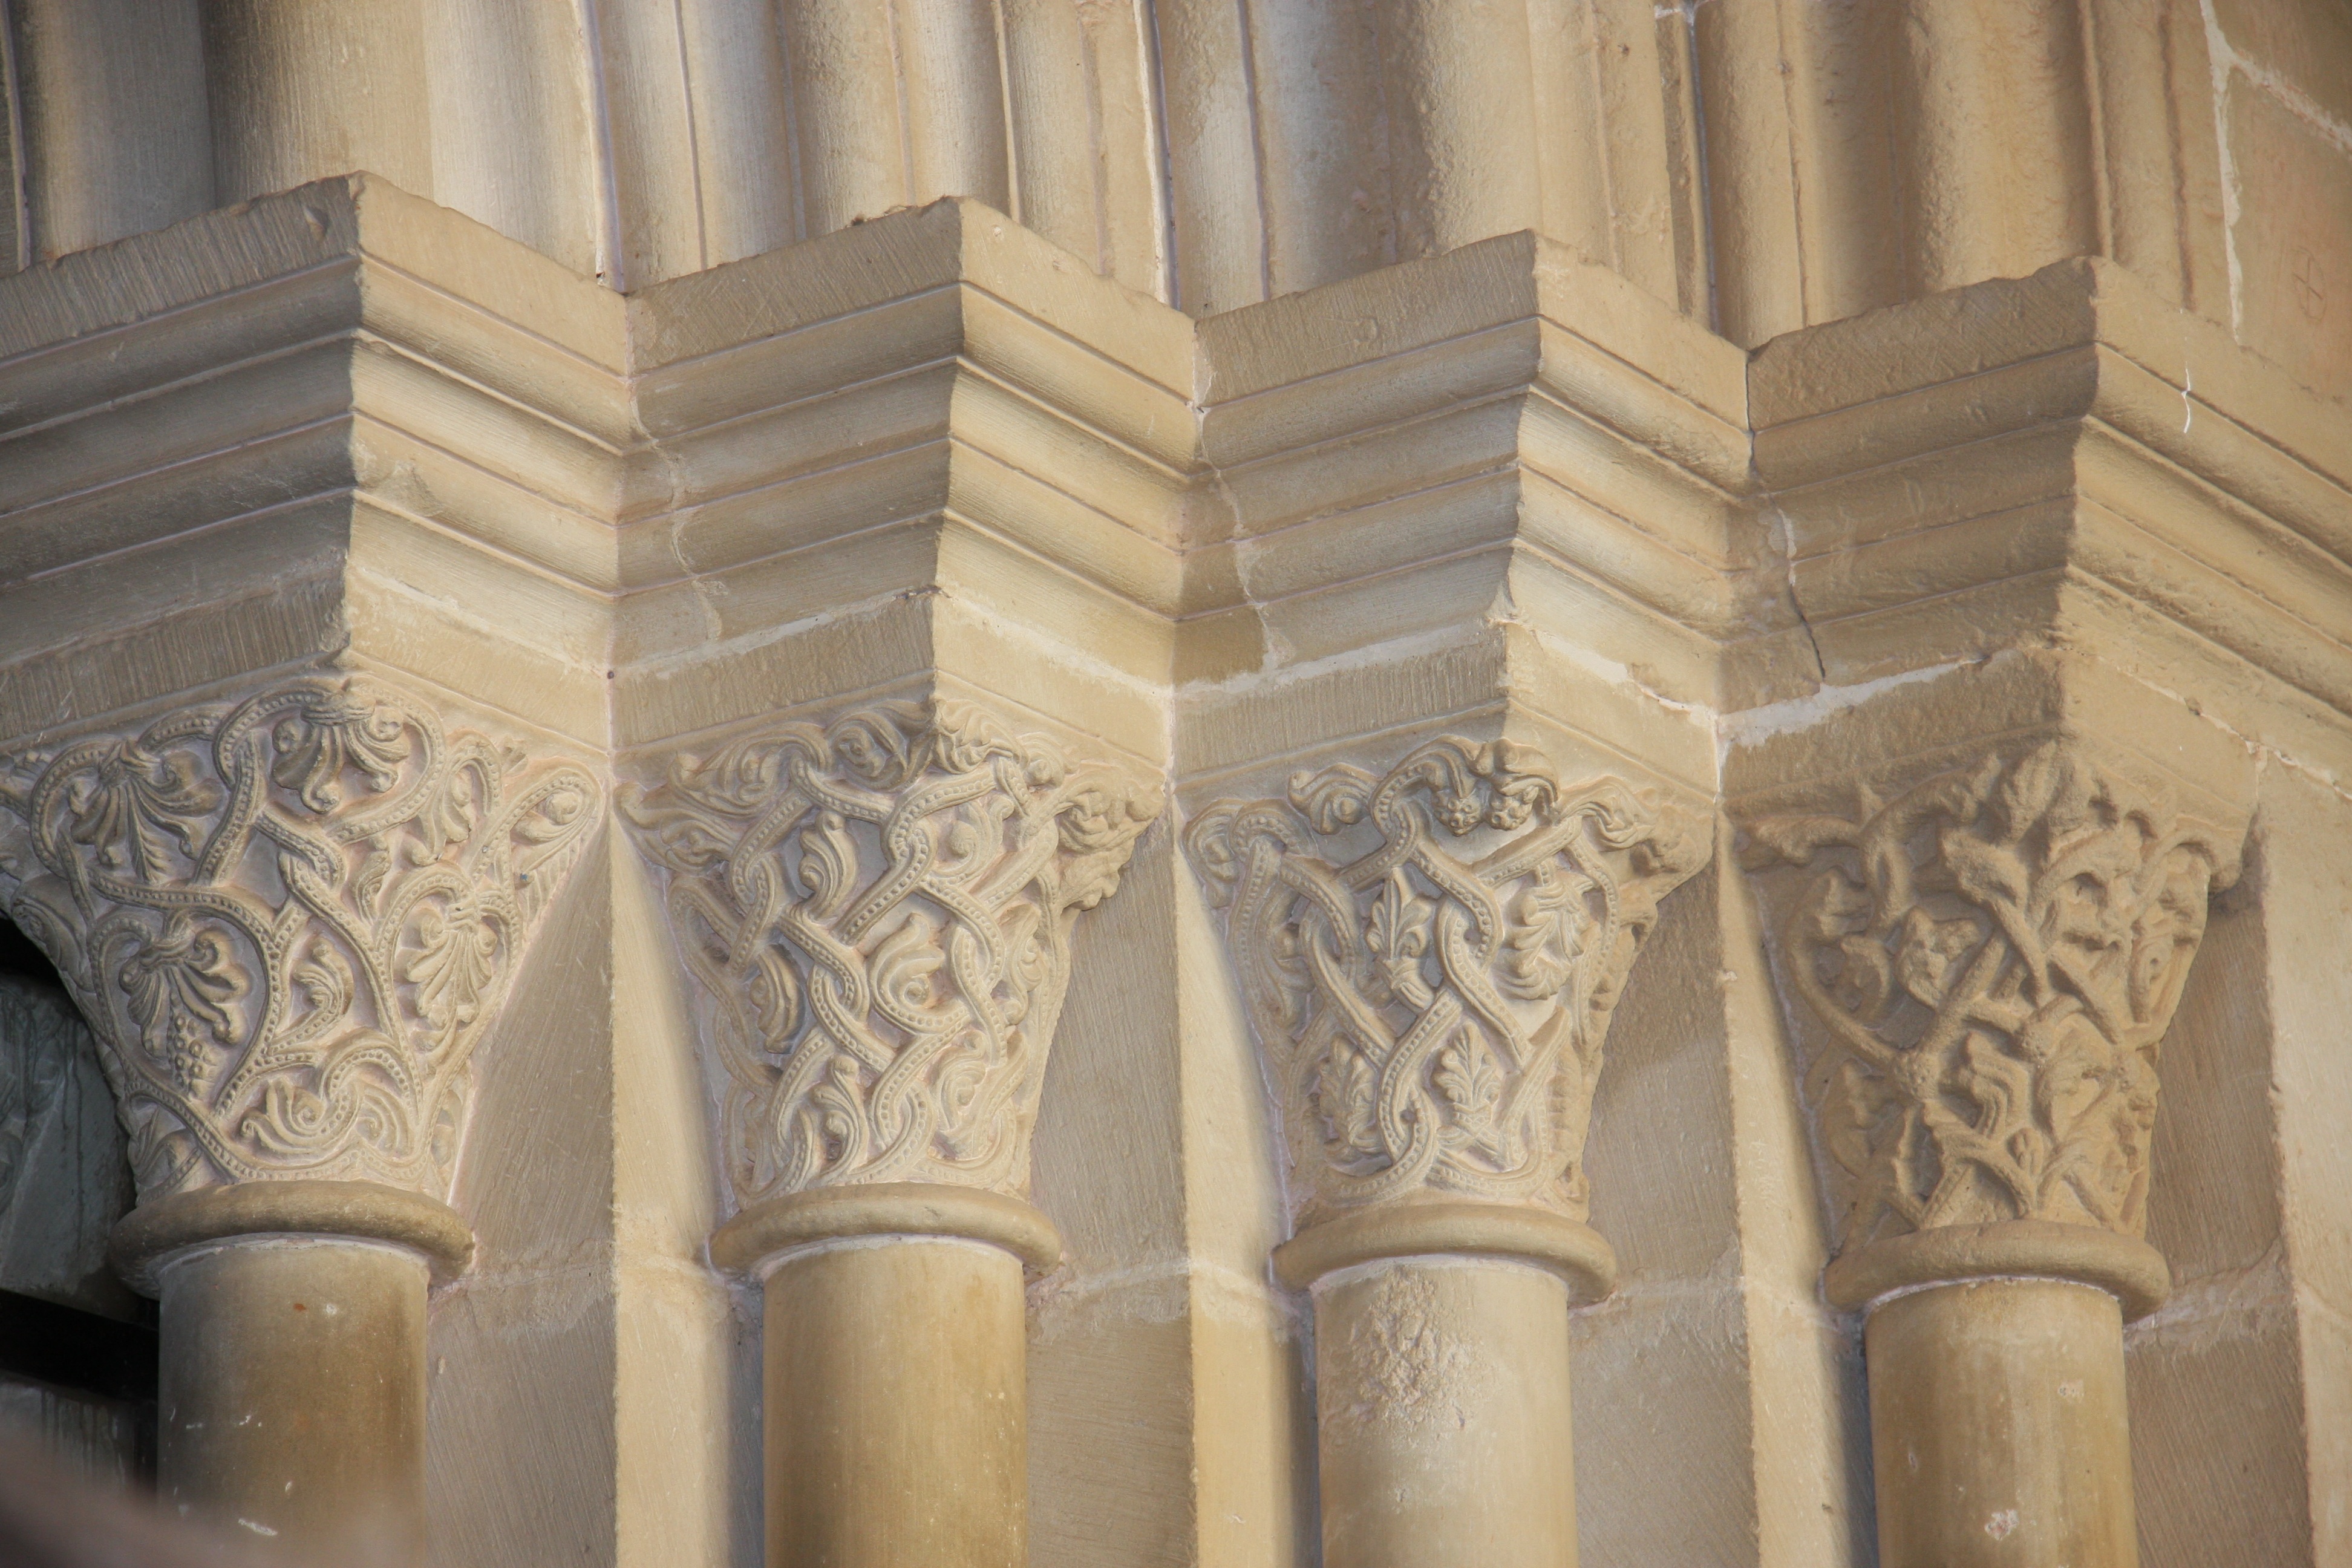 Details of Romanesque pillars at Poblet monastery